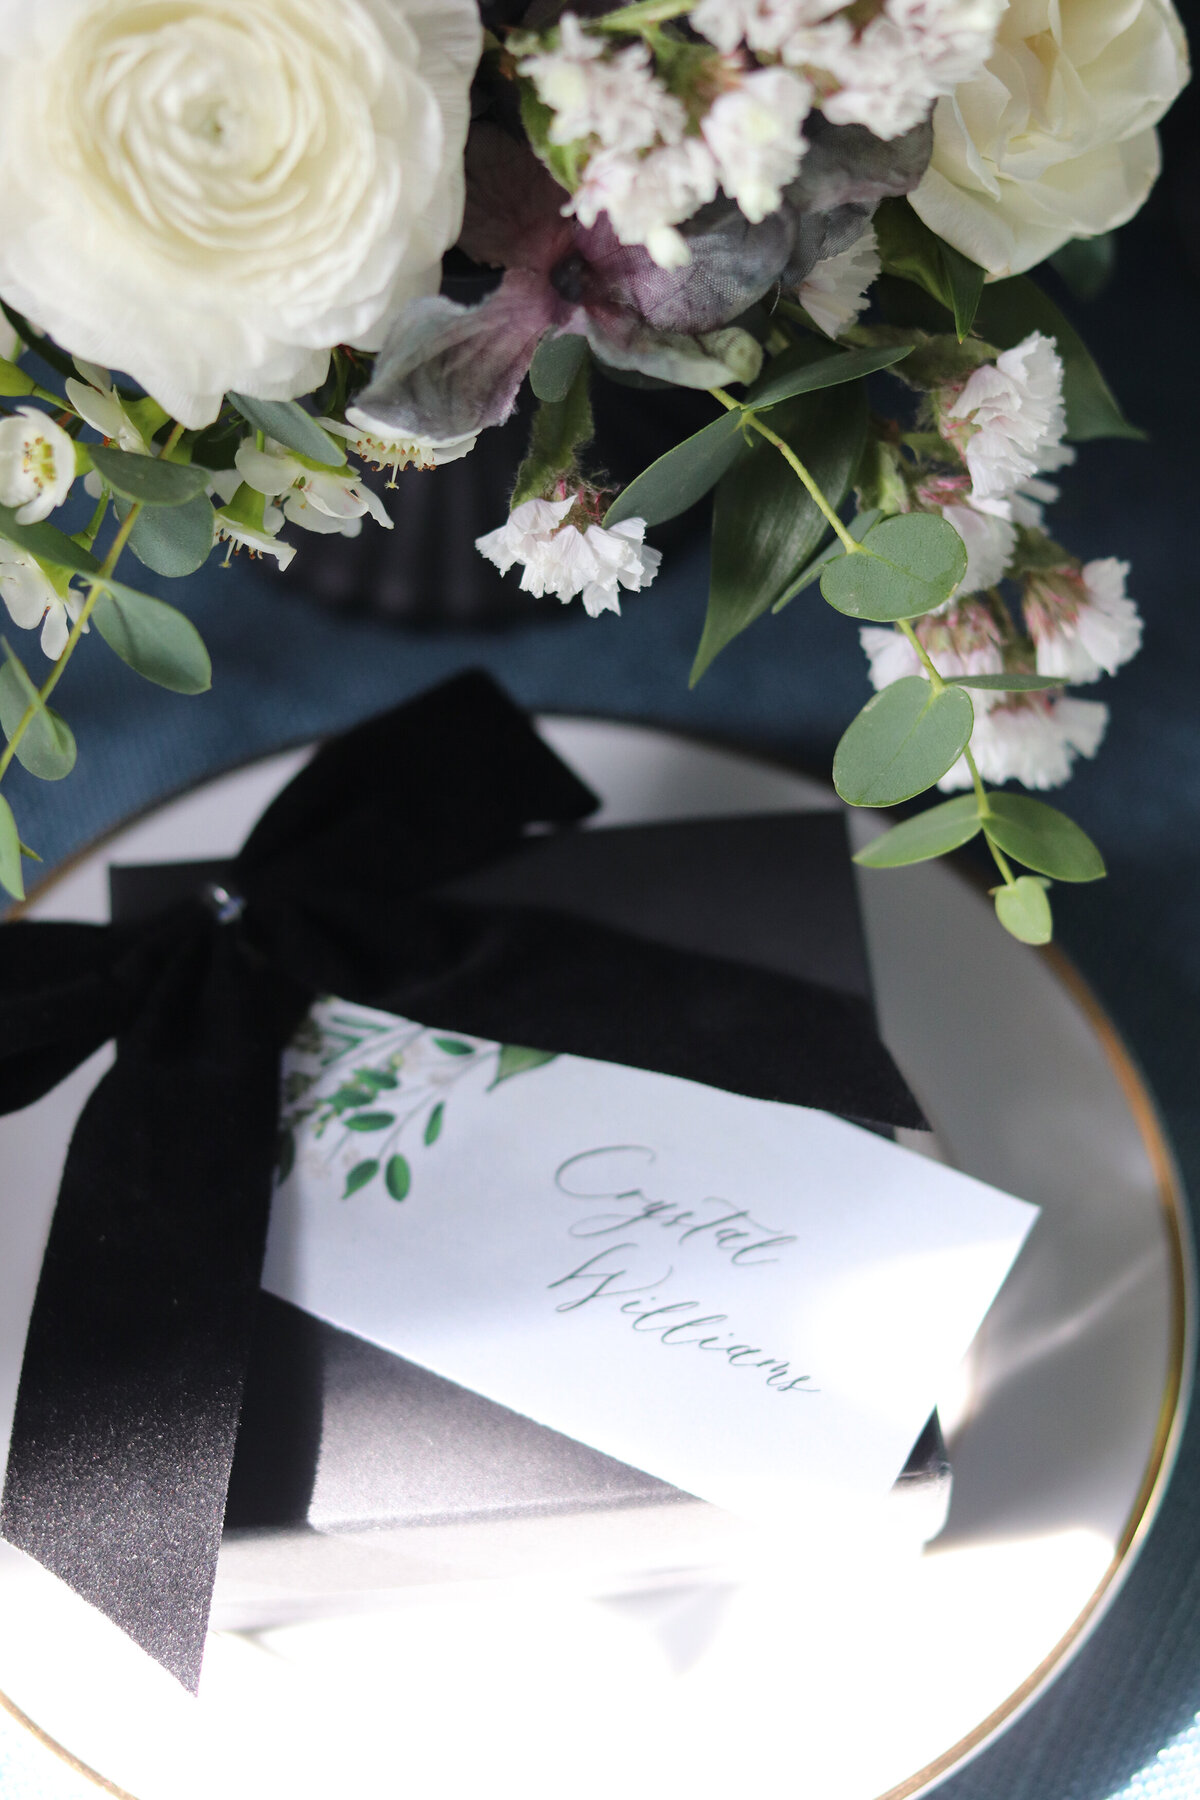 A wedding favor with a black velvet ribbon and a floral name tag sitting on a small plate next to a flower arrangement